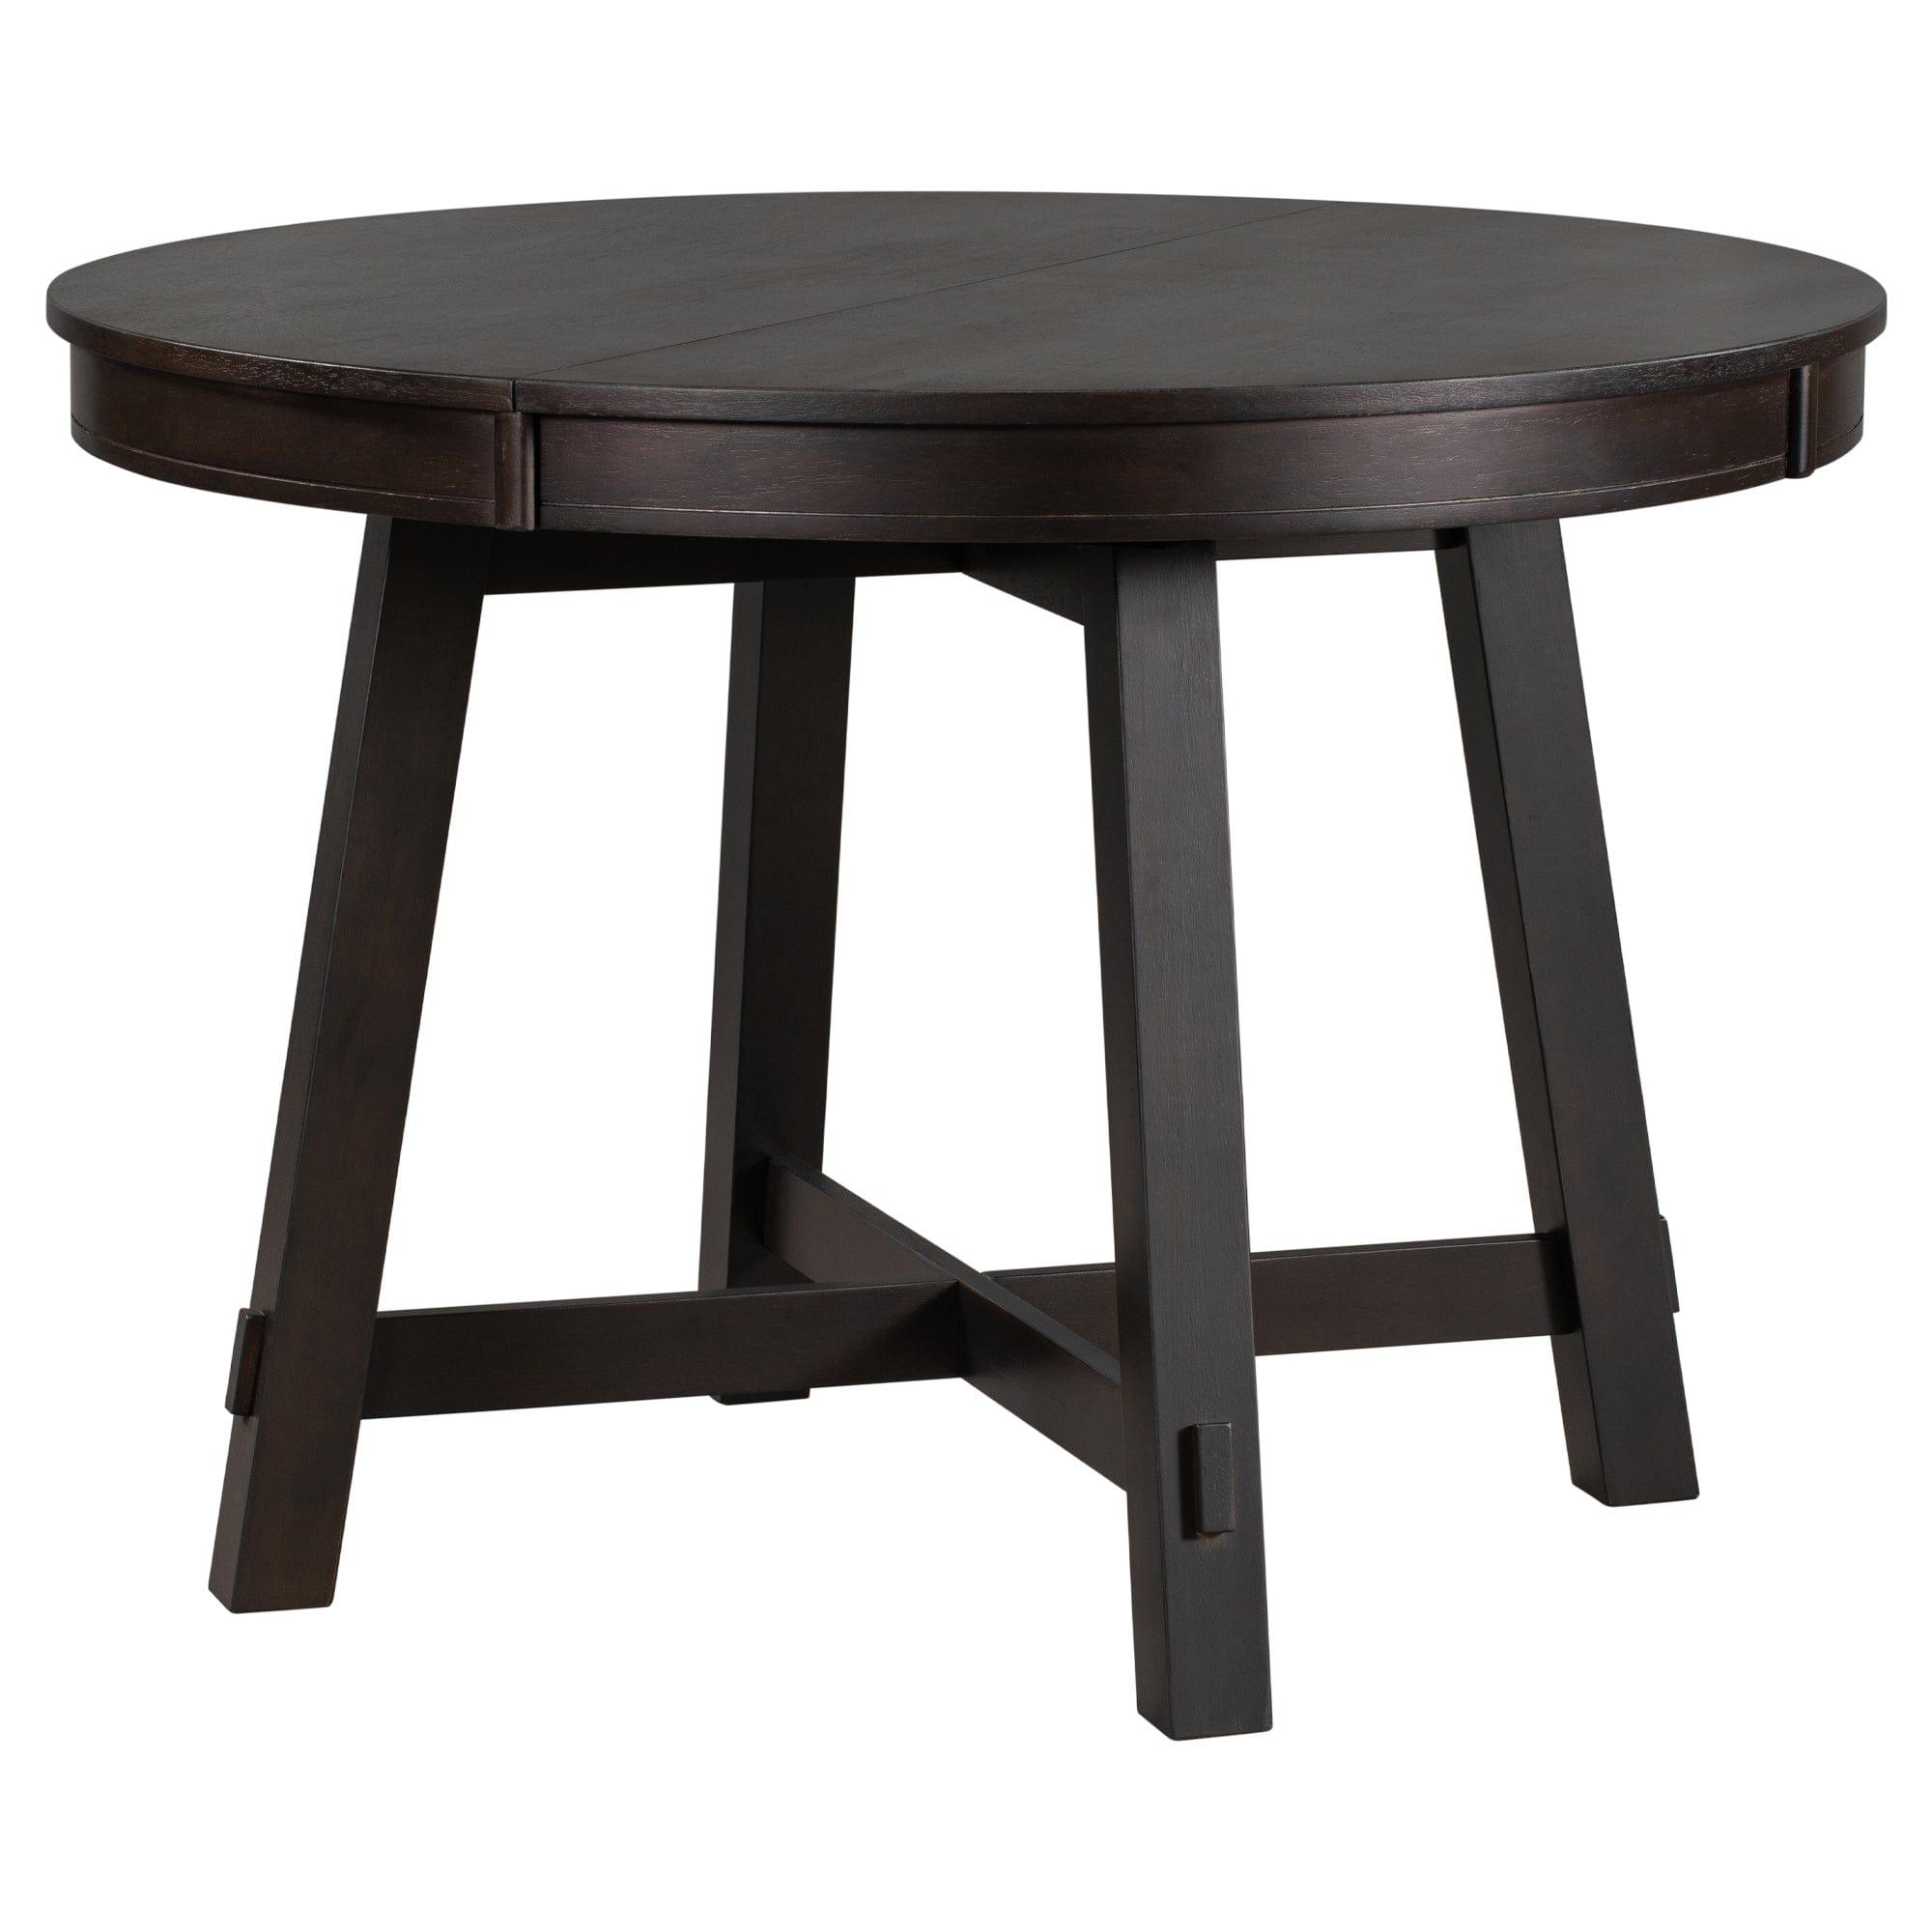 Shop TREXM Farmhouse Round Extendable Dining Table with 16" Leaf Wood Kitchen Table (Espresso) Mademoiselle Home Decor